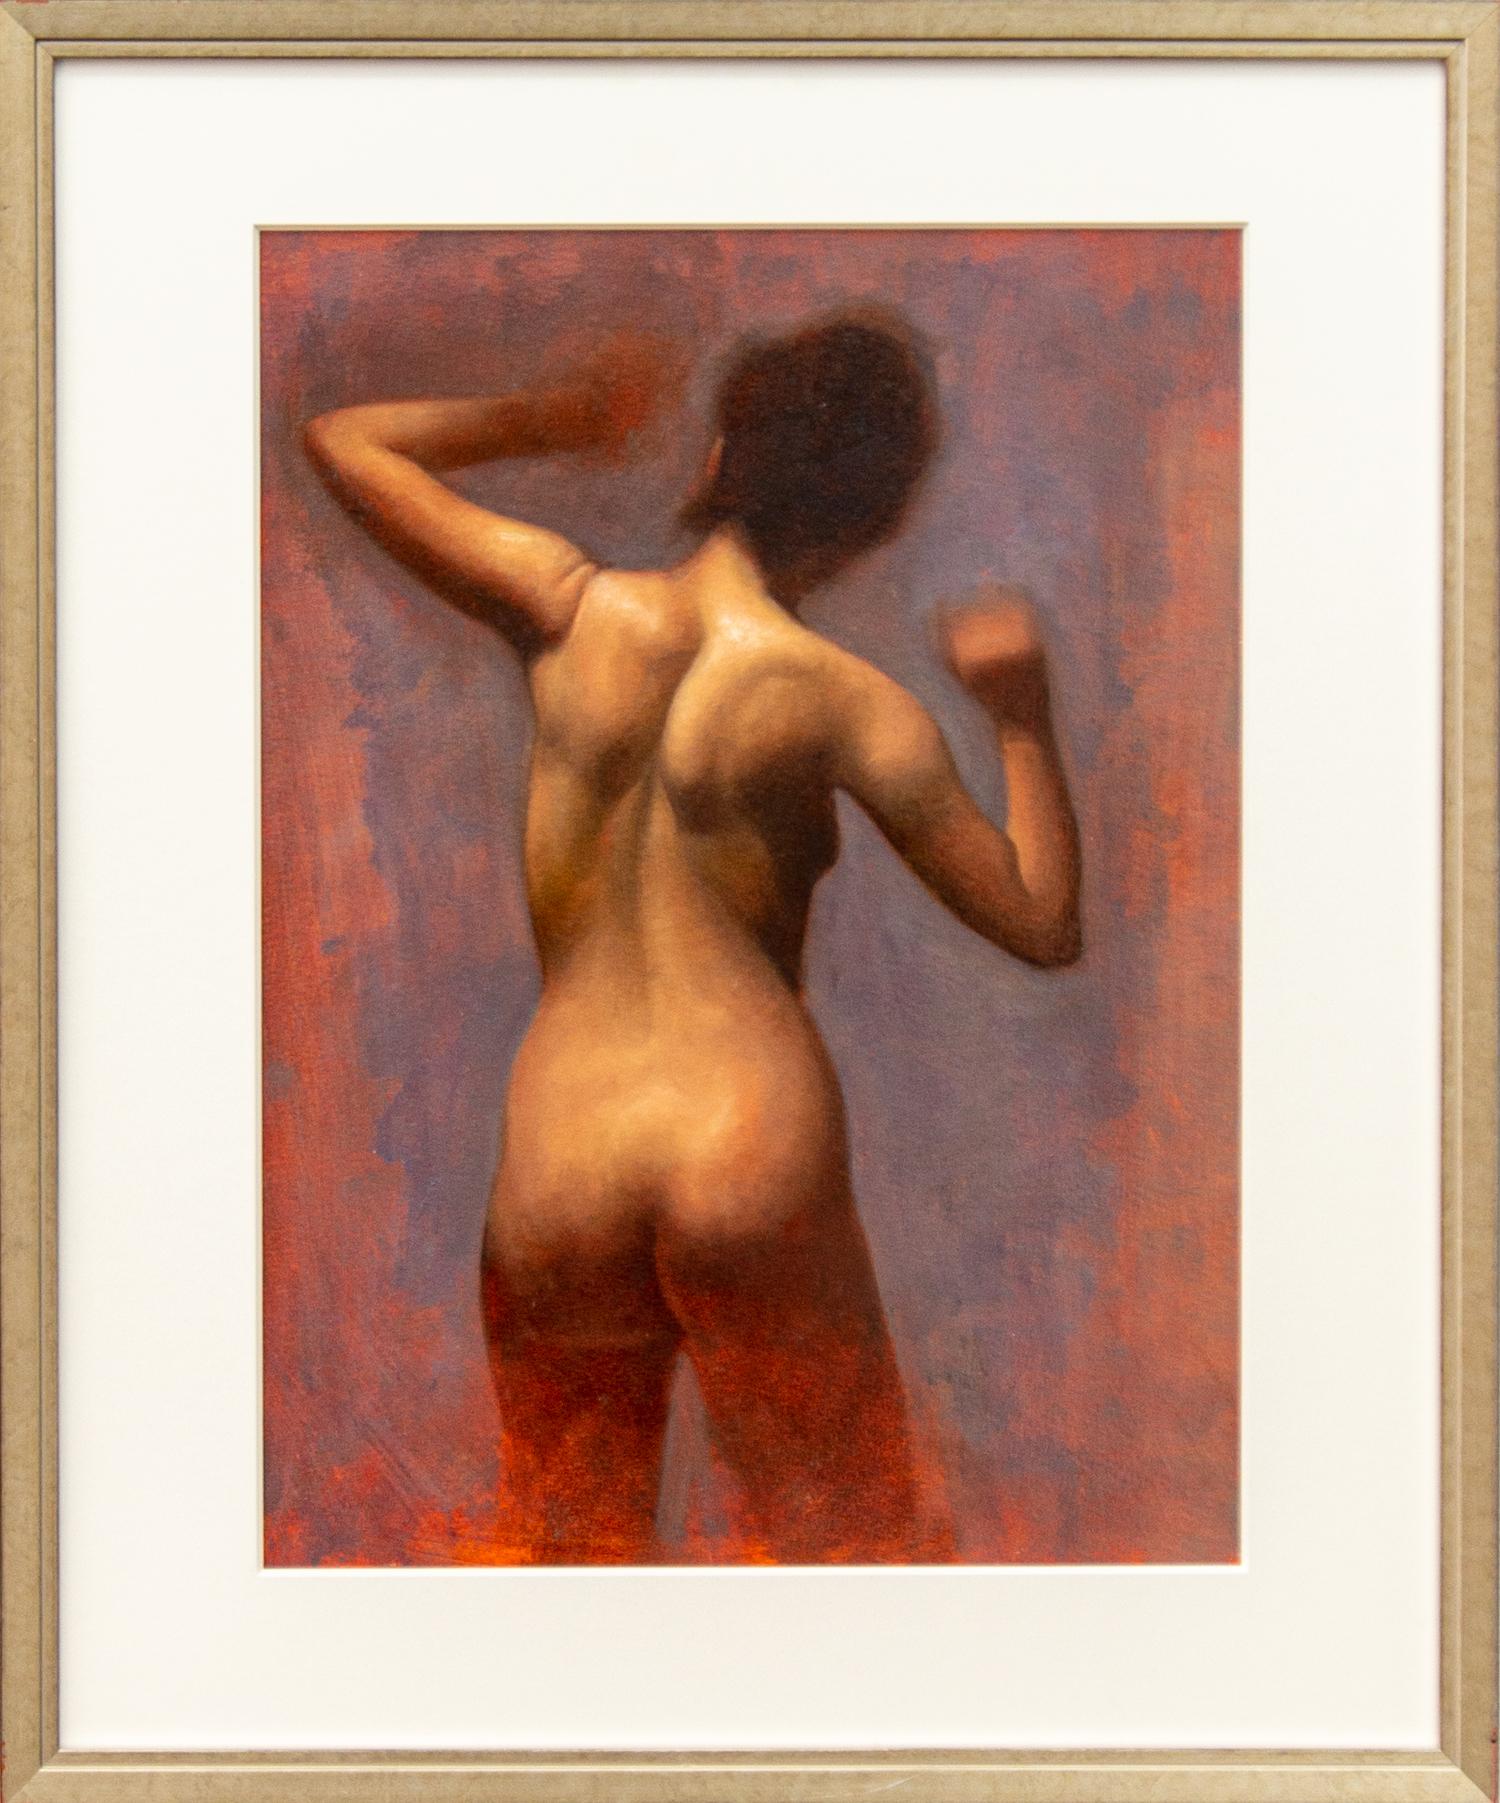 Nude Back - soft, colorful, abstracted figurative, nude, female, oil on paper - Painting by Daniel Hughes